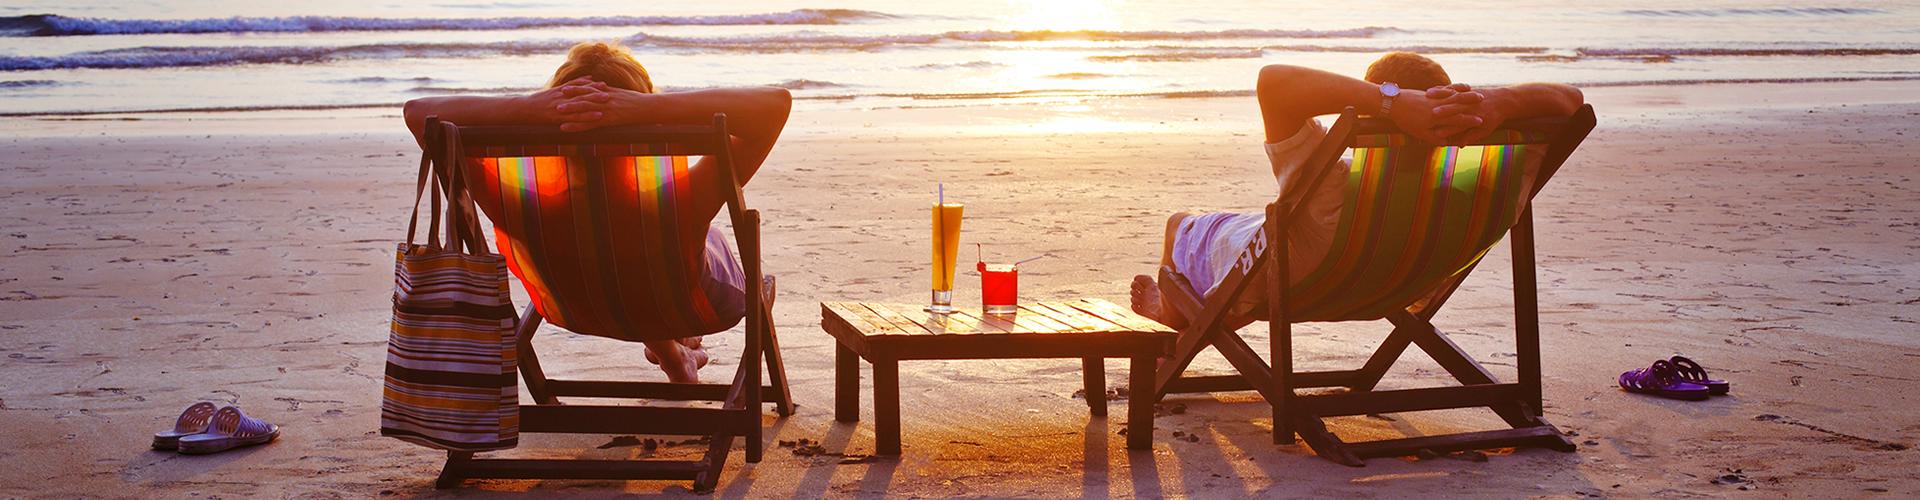 Investments Header: Retired Couple relaxing on beach